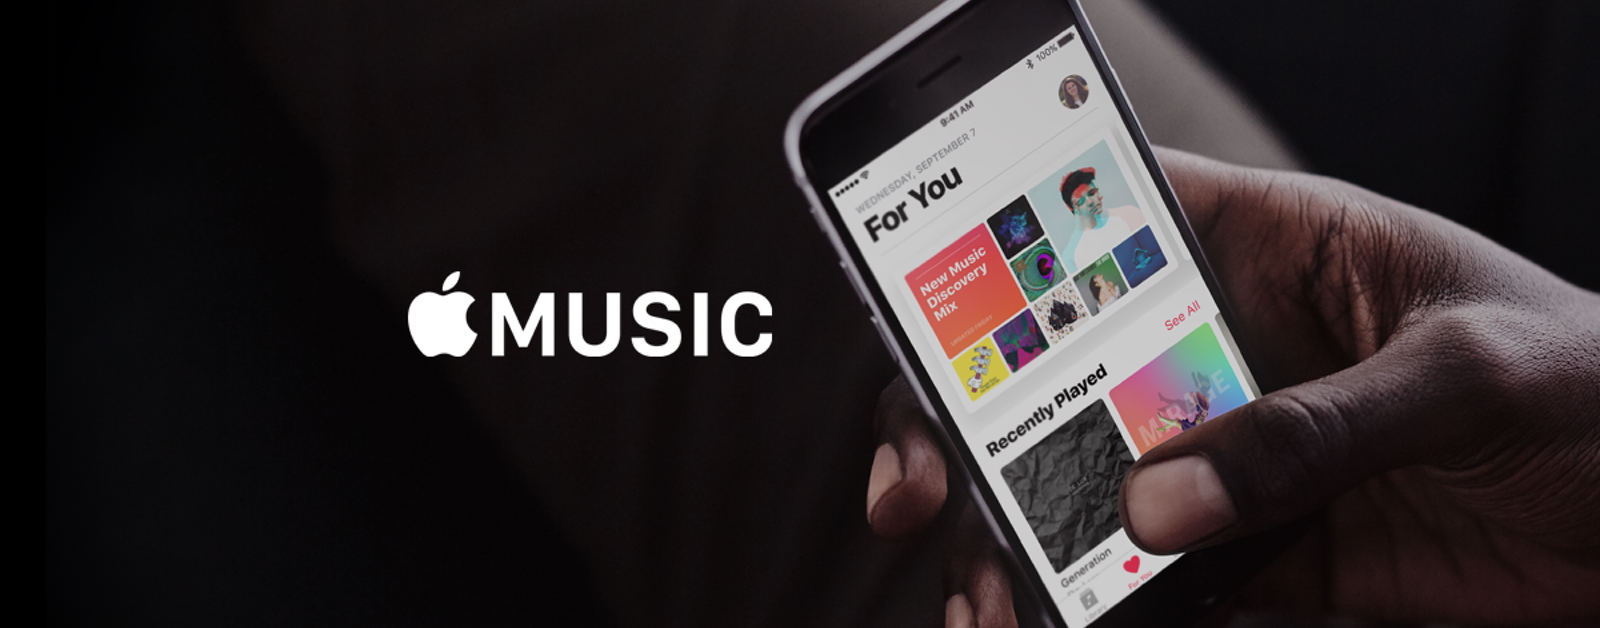 Apple Music Has ‘Well Over’ 30 Million Paid Subscribers, but ‘Isn’t in the Right Place’